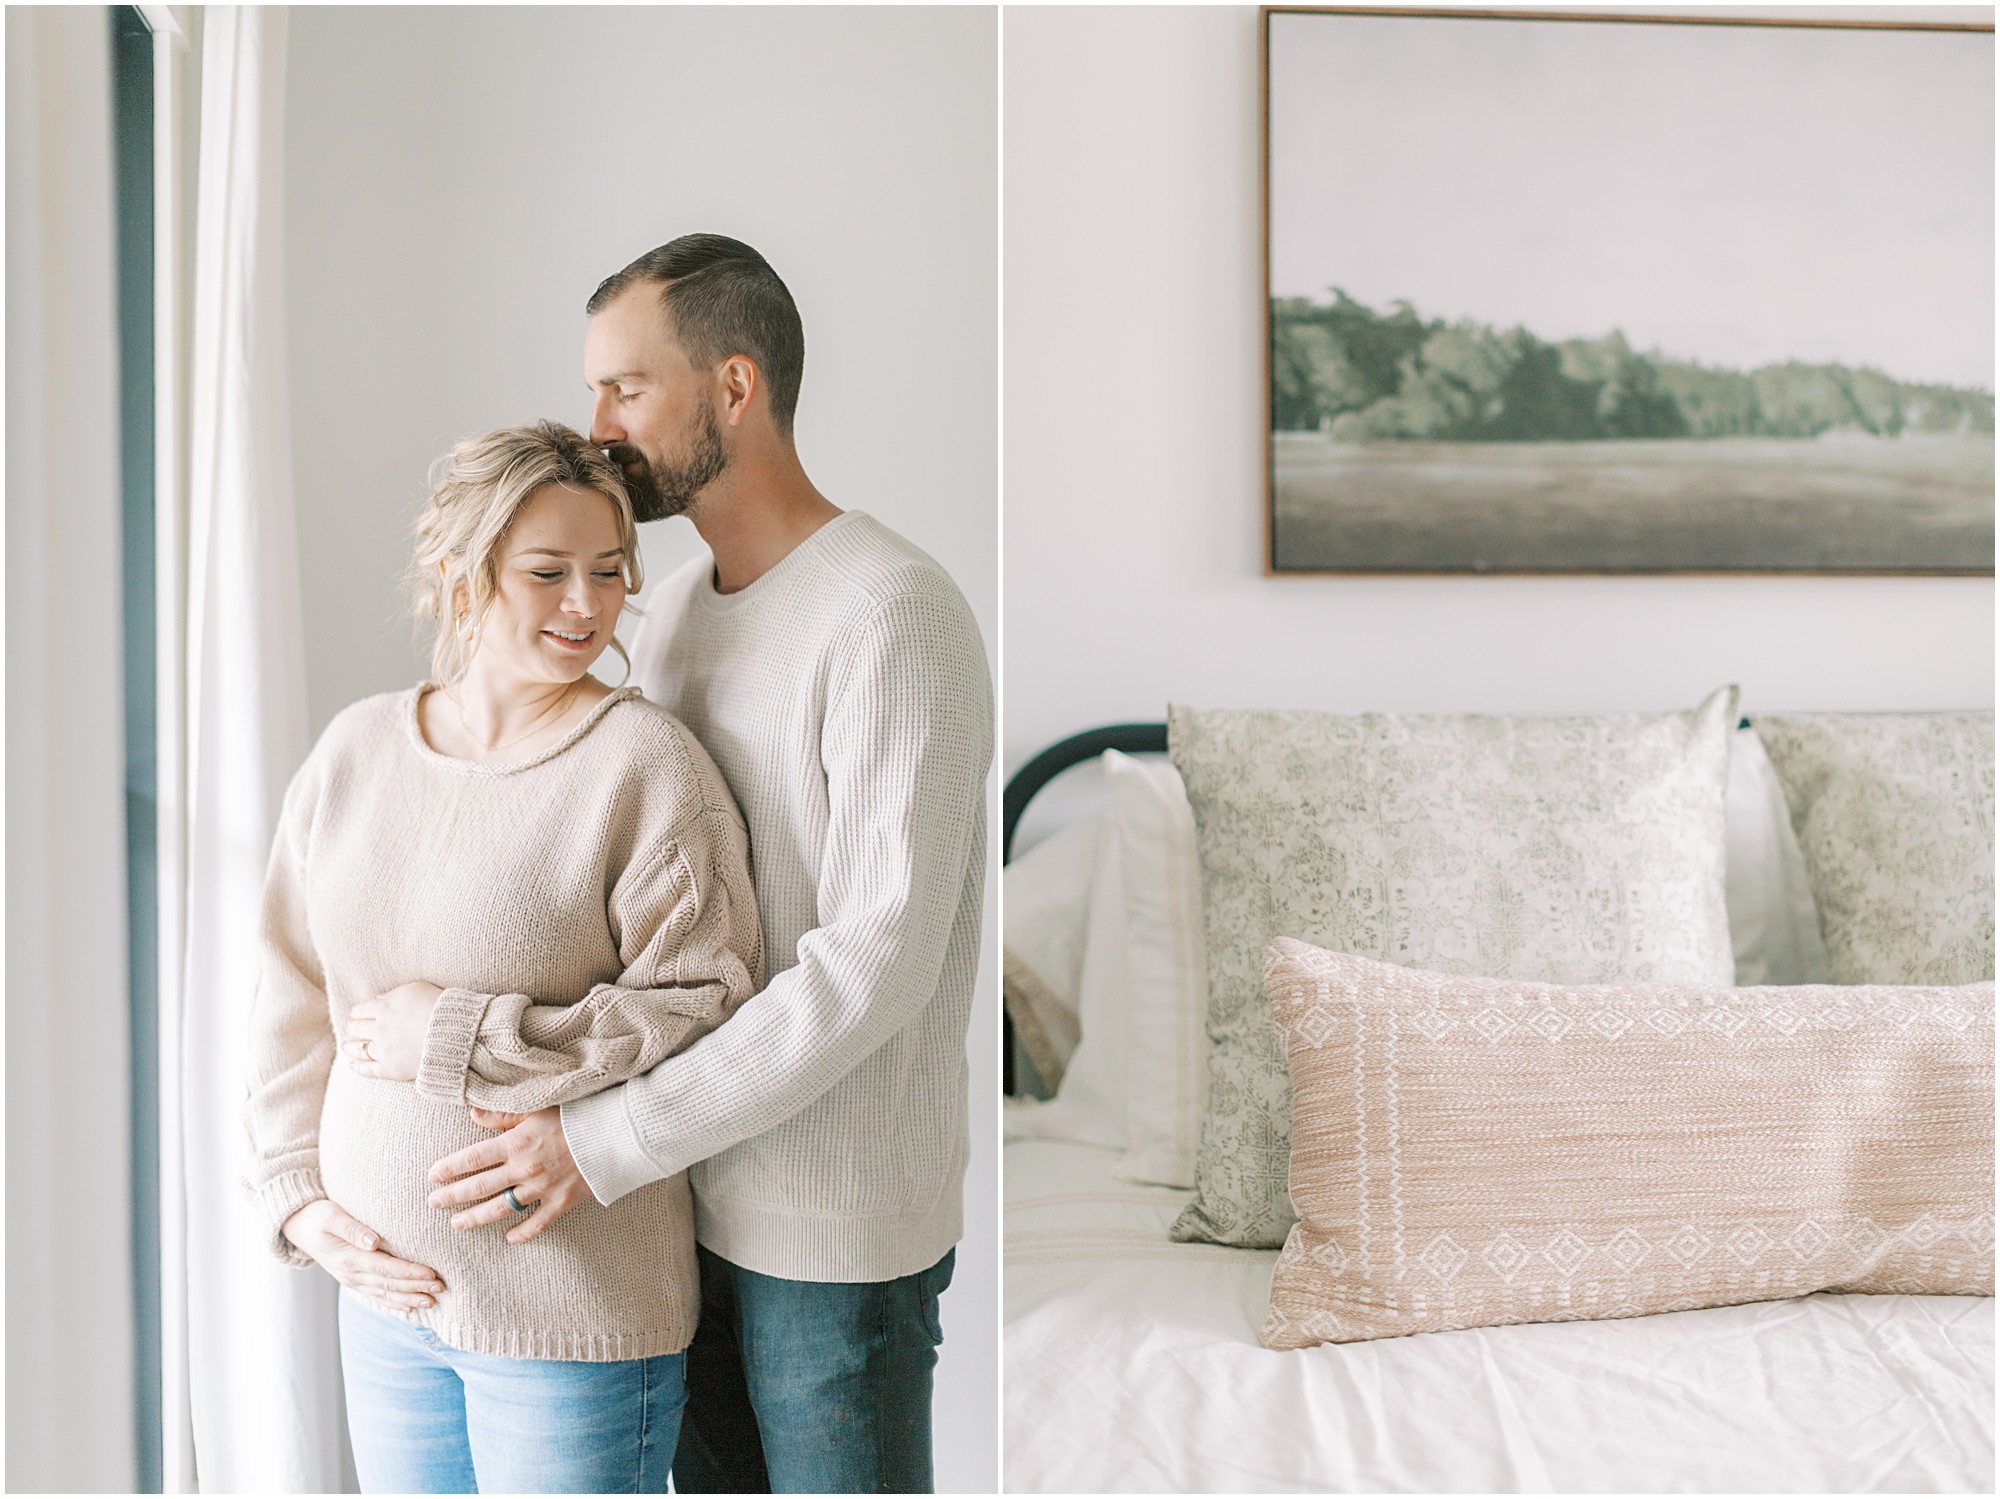 Couple at maternity session in York, PA and details of room that session was taken in